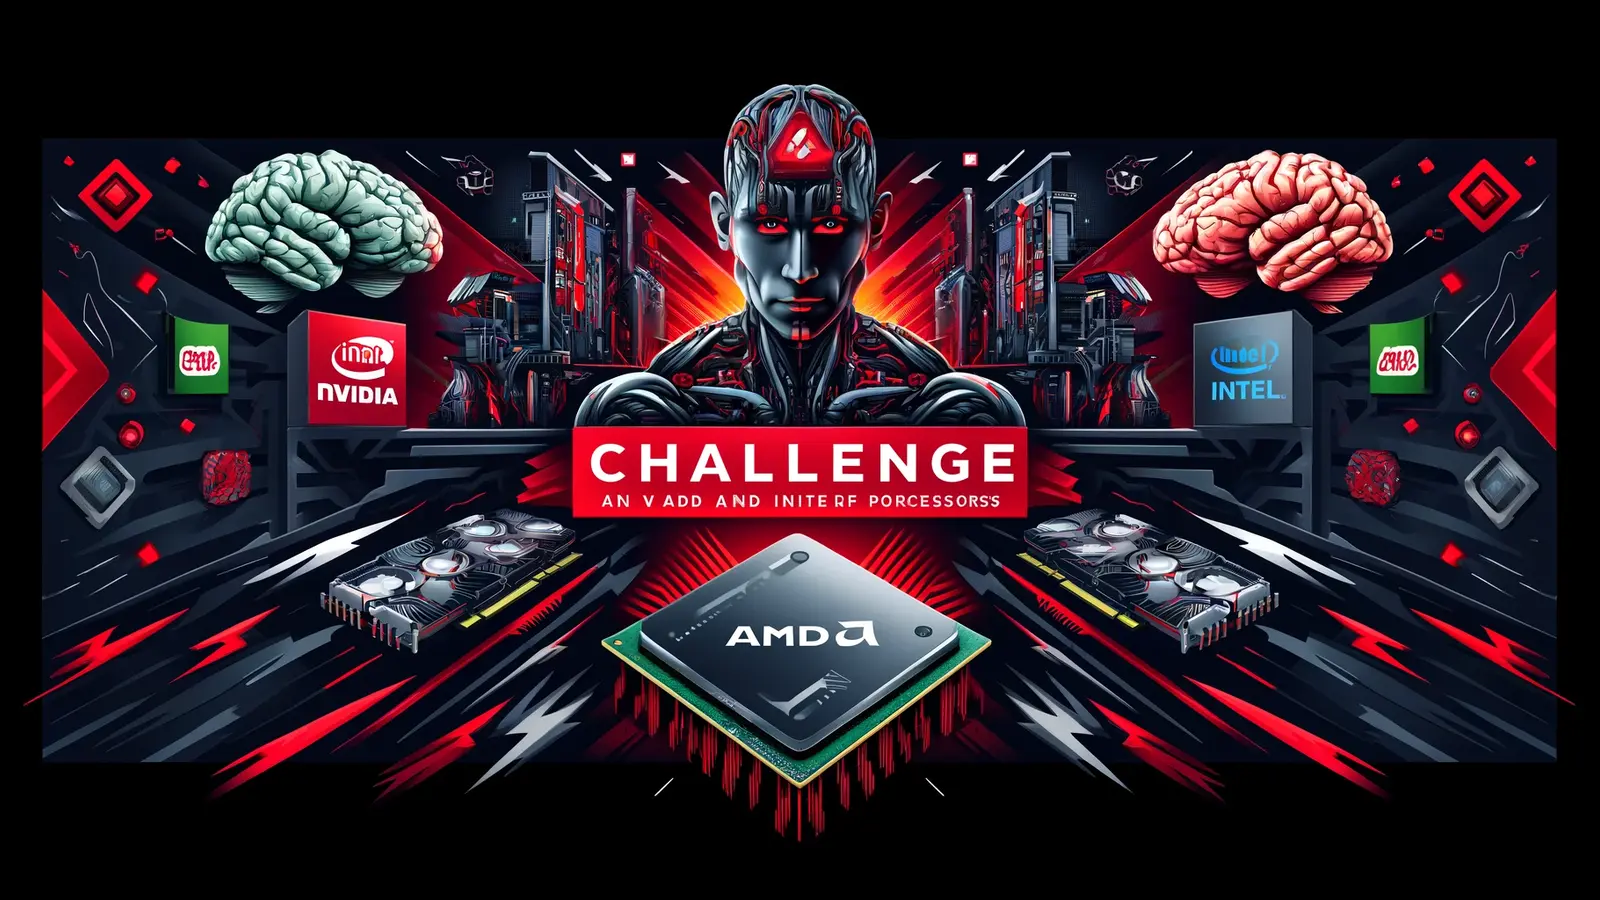 AMD Challenges Nvidia and Intel with New AI-Powered Processors